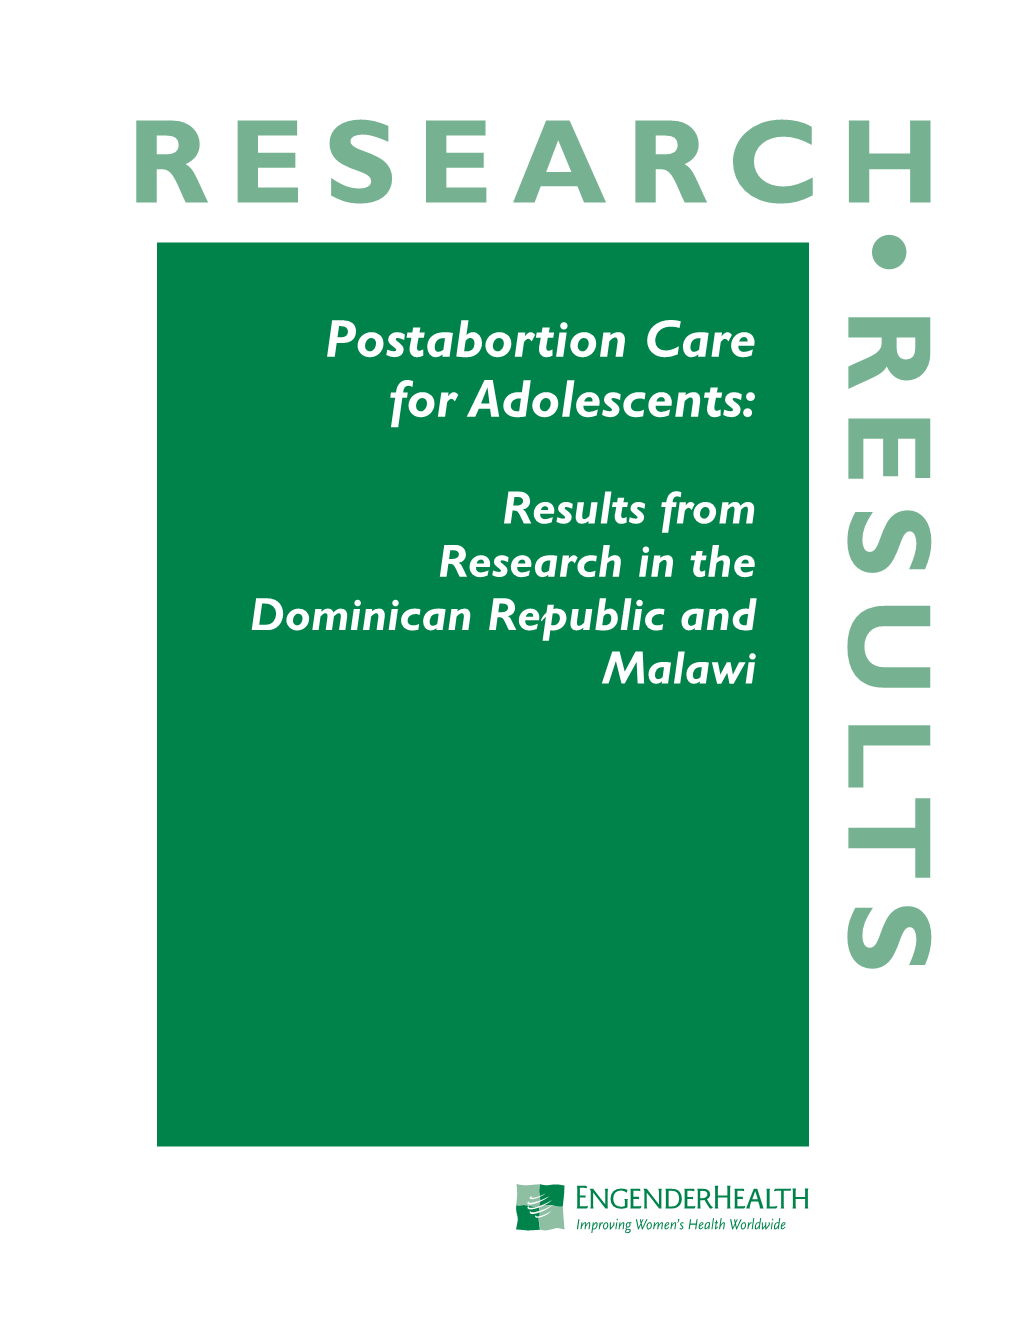 Postabortion Care for Adolescents: Results from Research in the Dominican Republic and Malawi